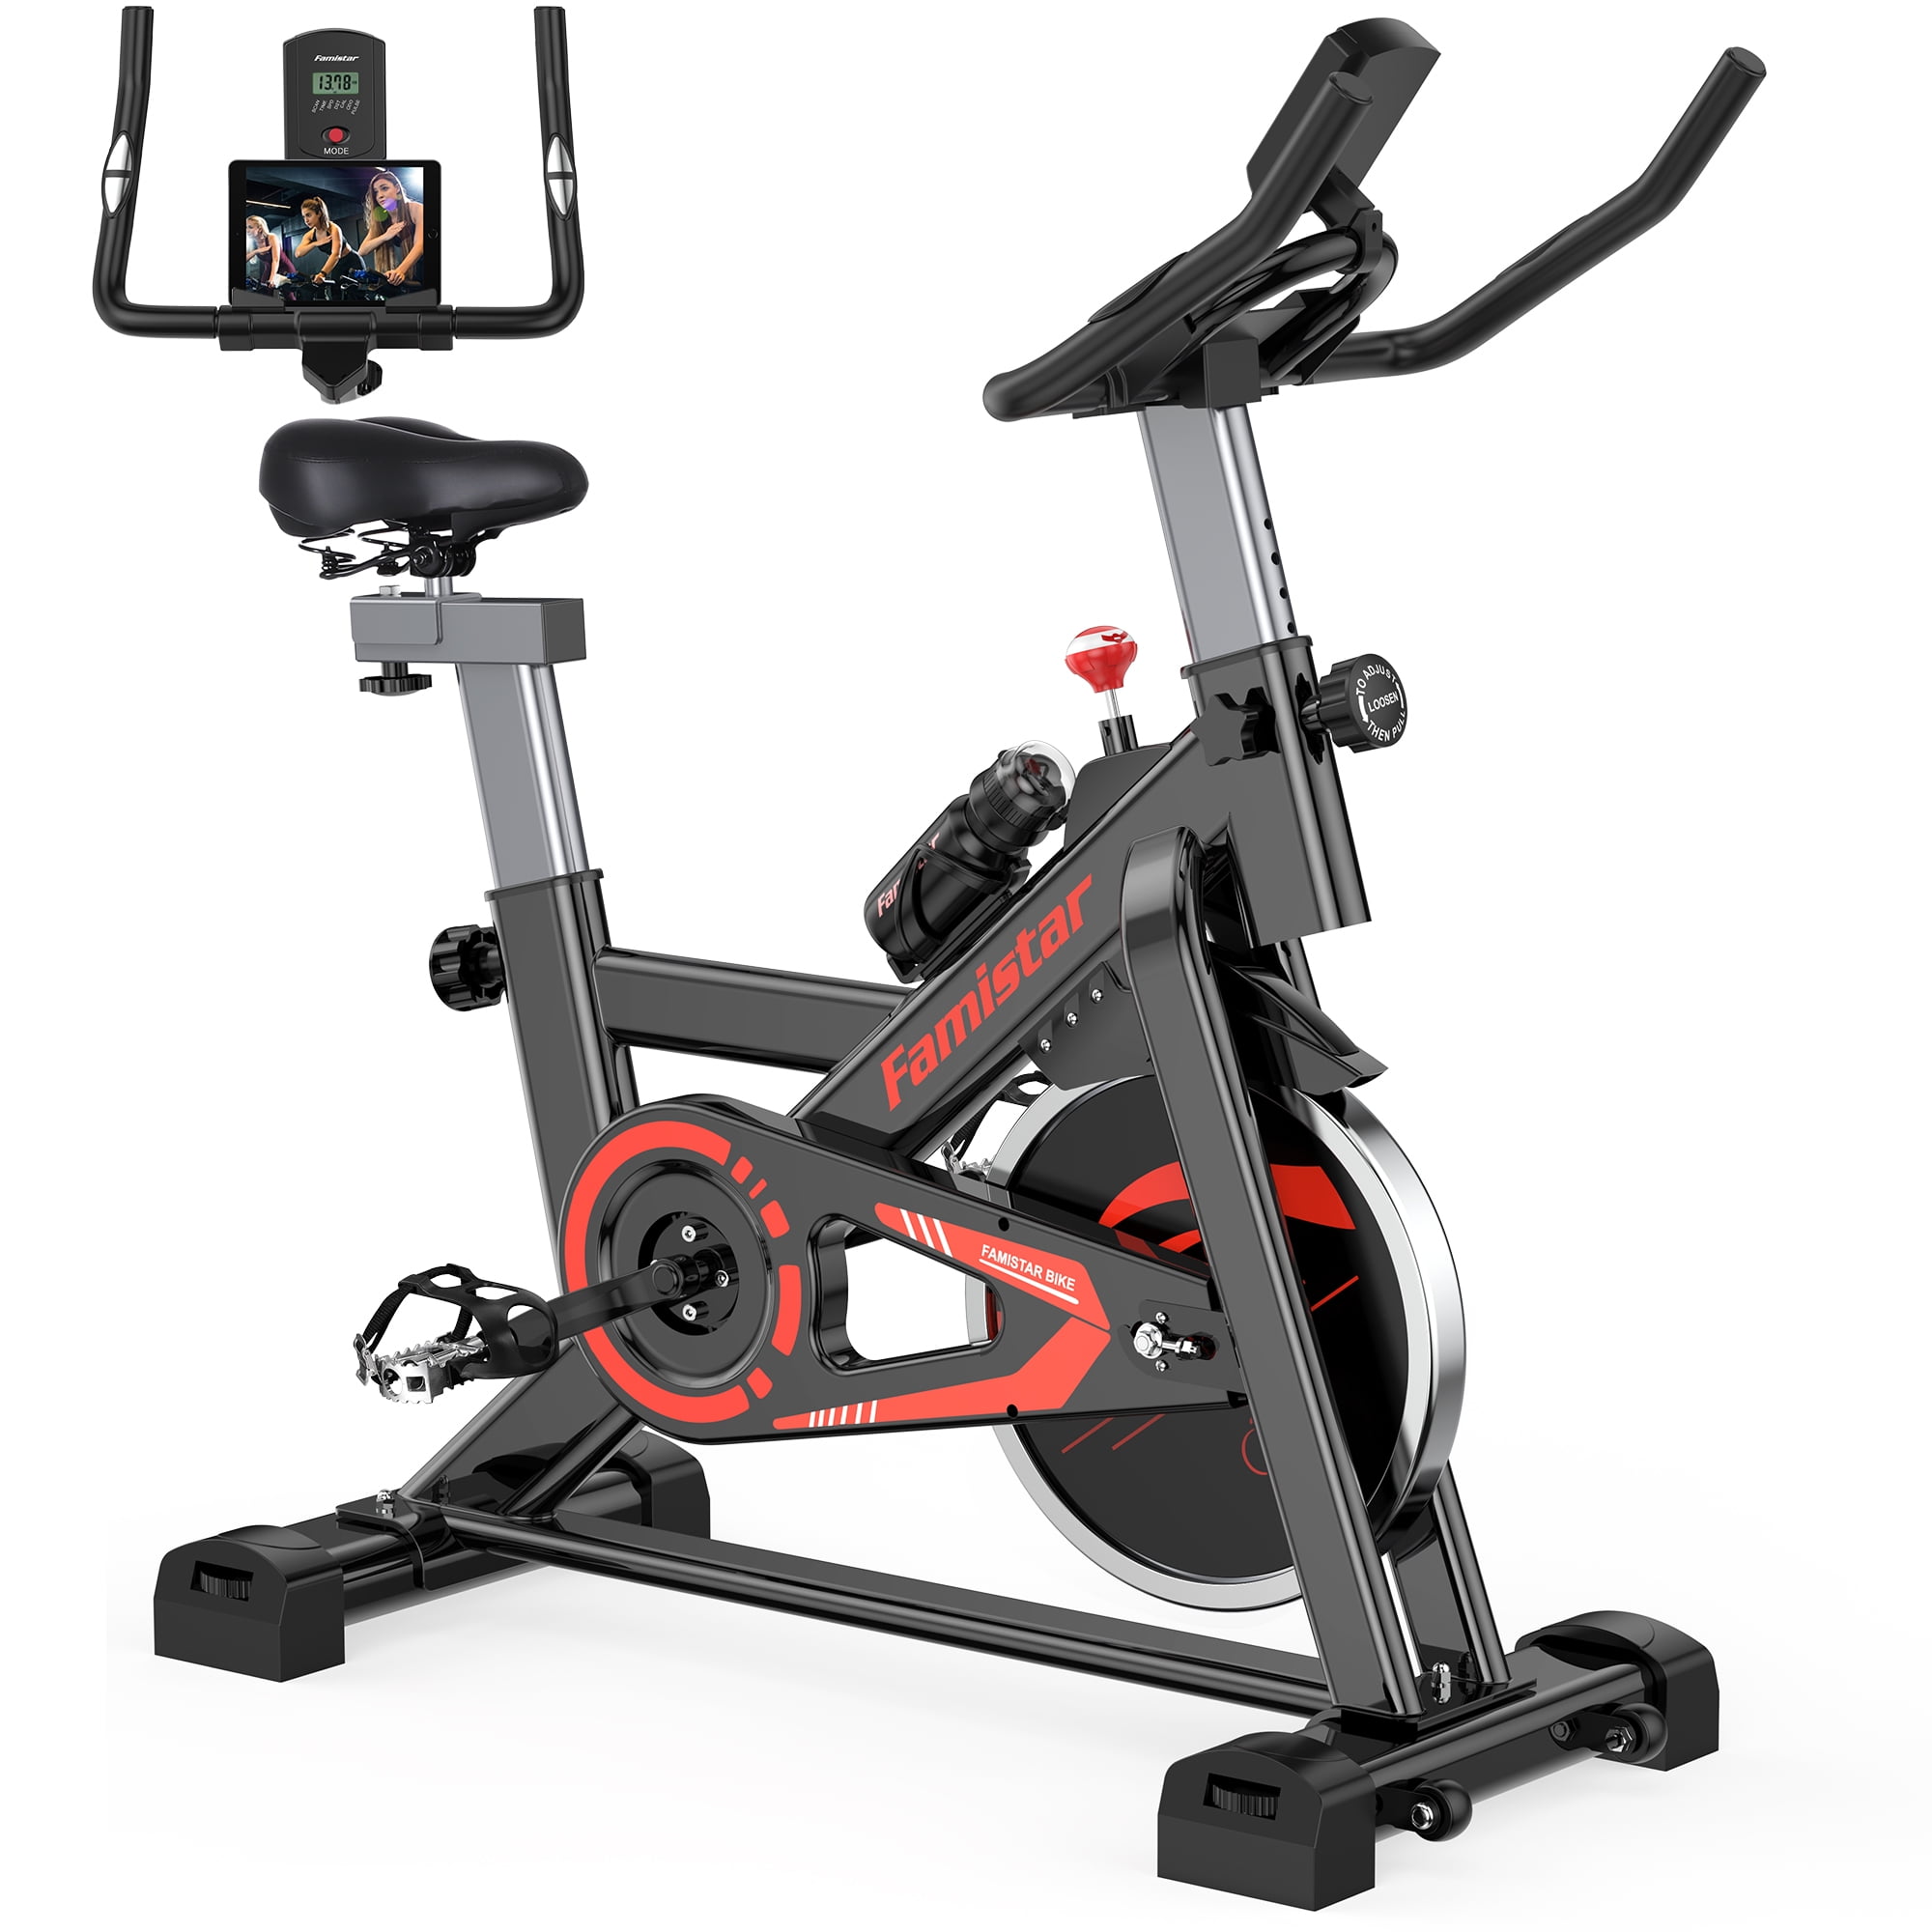 Details about   Bicycle Bike Fitness Home Exercise Stationary Bike Aerobics Family Indoor Use 